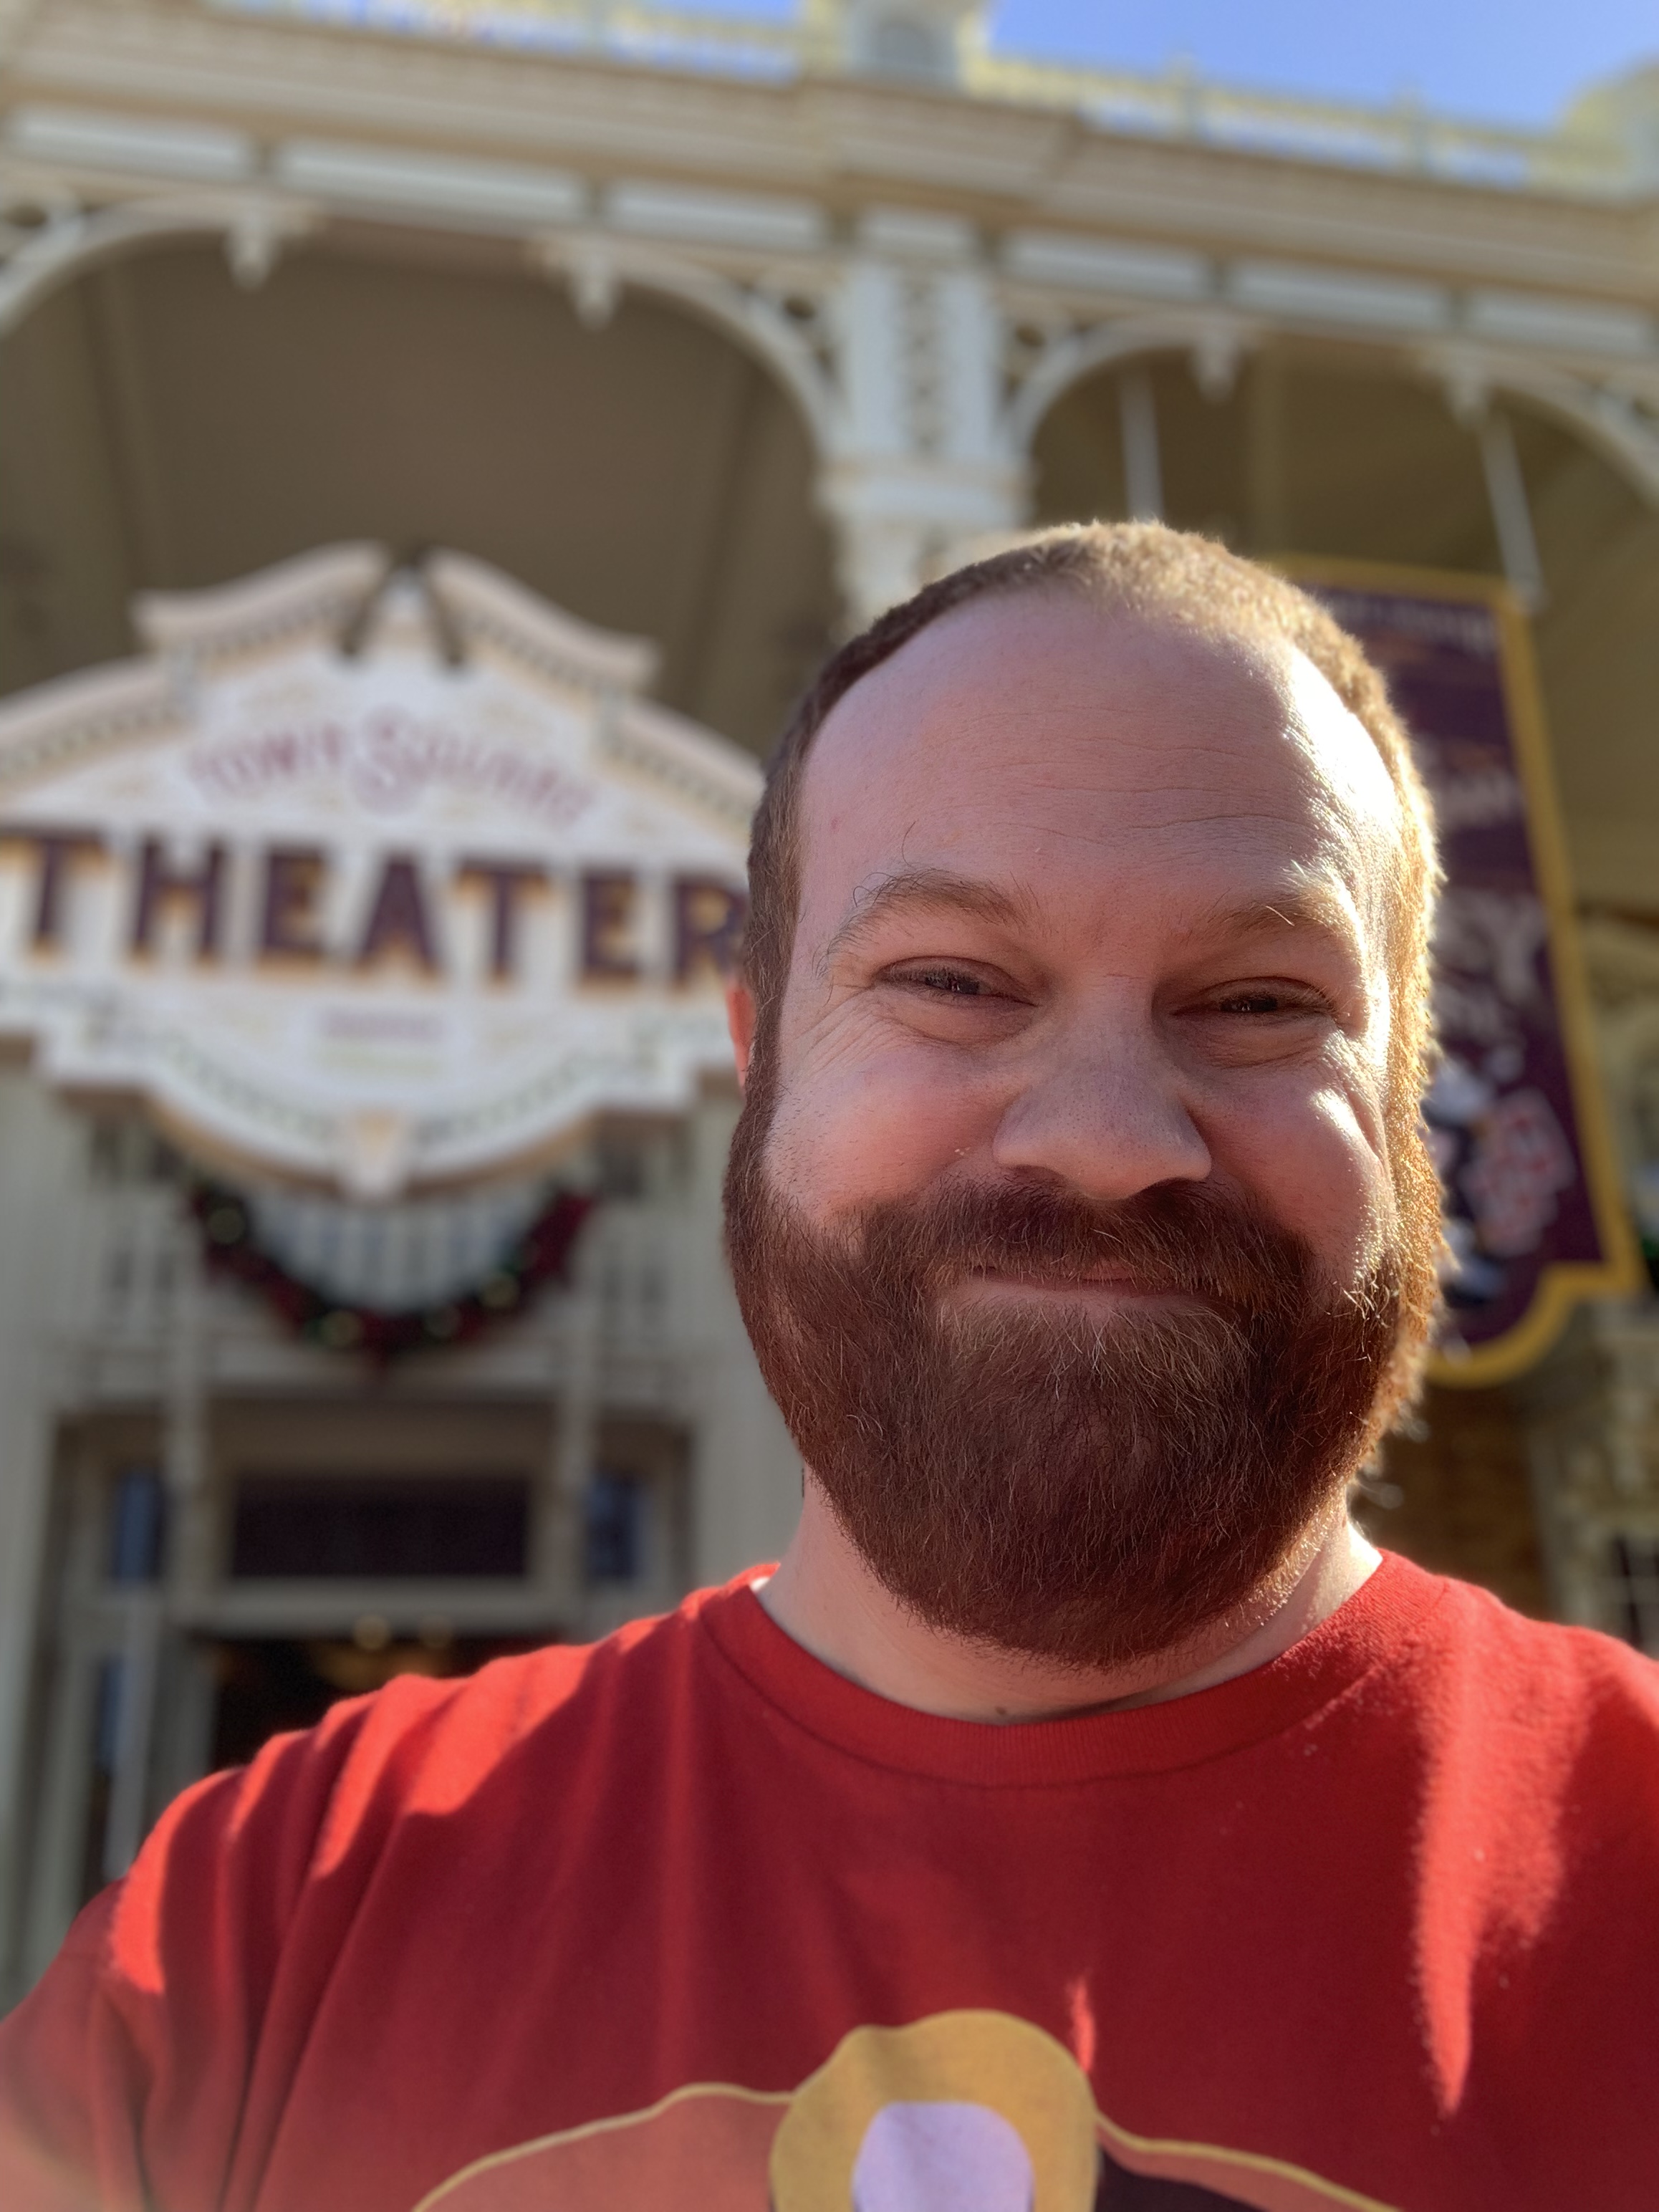 
            Ray Hollister in 2018 standing in front of the Town Square Theater in the Magic Kingdom at Walt Disney World.
            
            